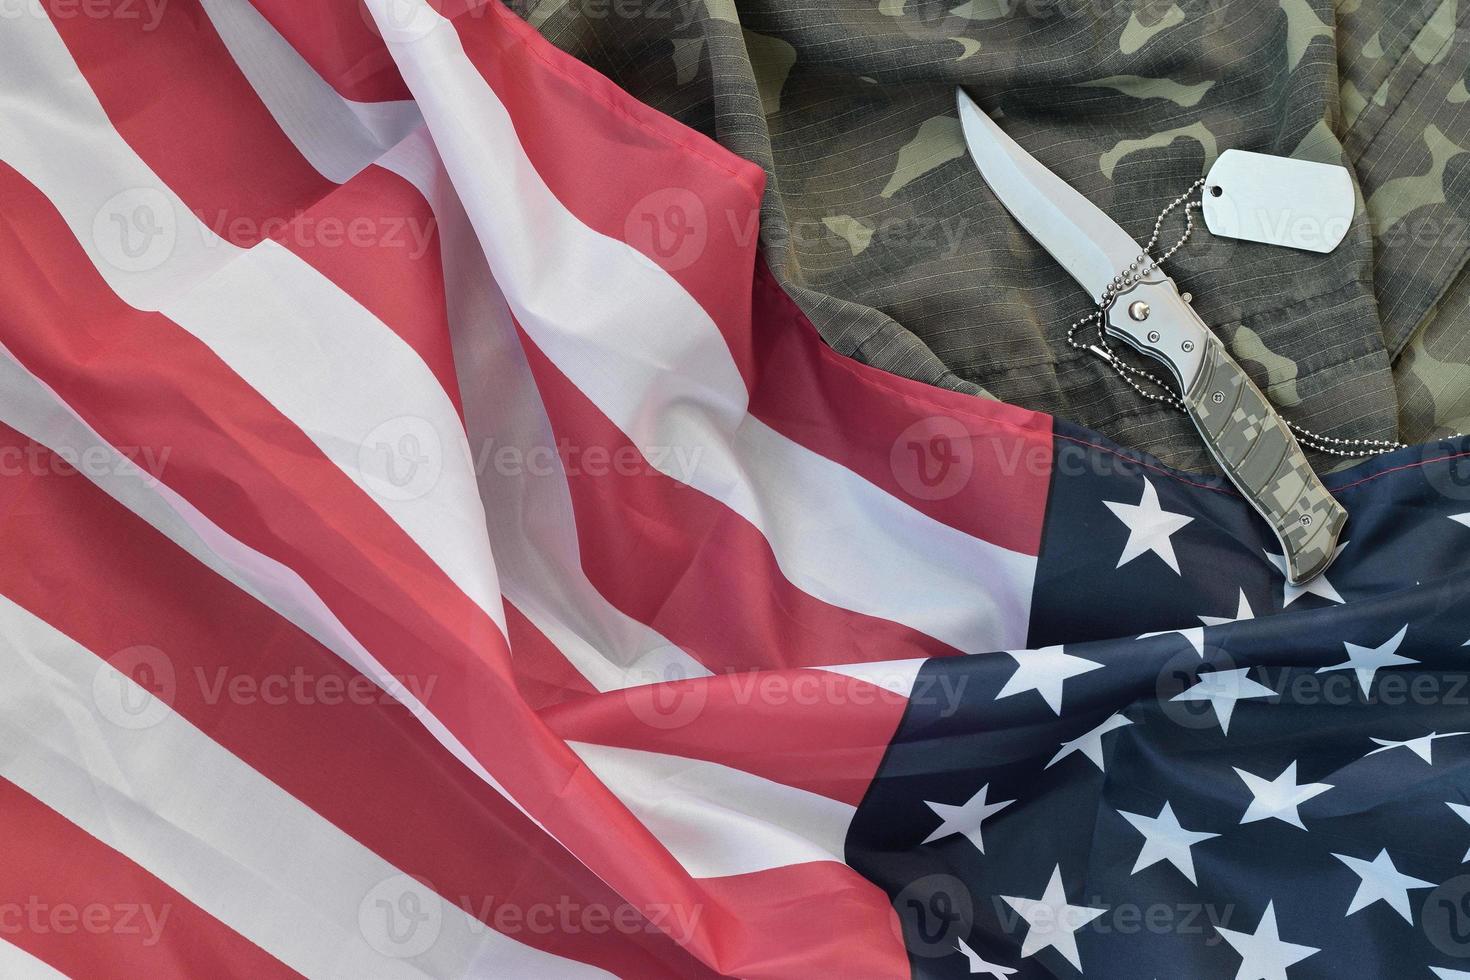 Army dog tag token and knife lies on Old Camouflage uniform and folded United States Flag photo